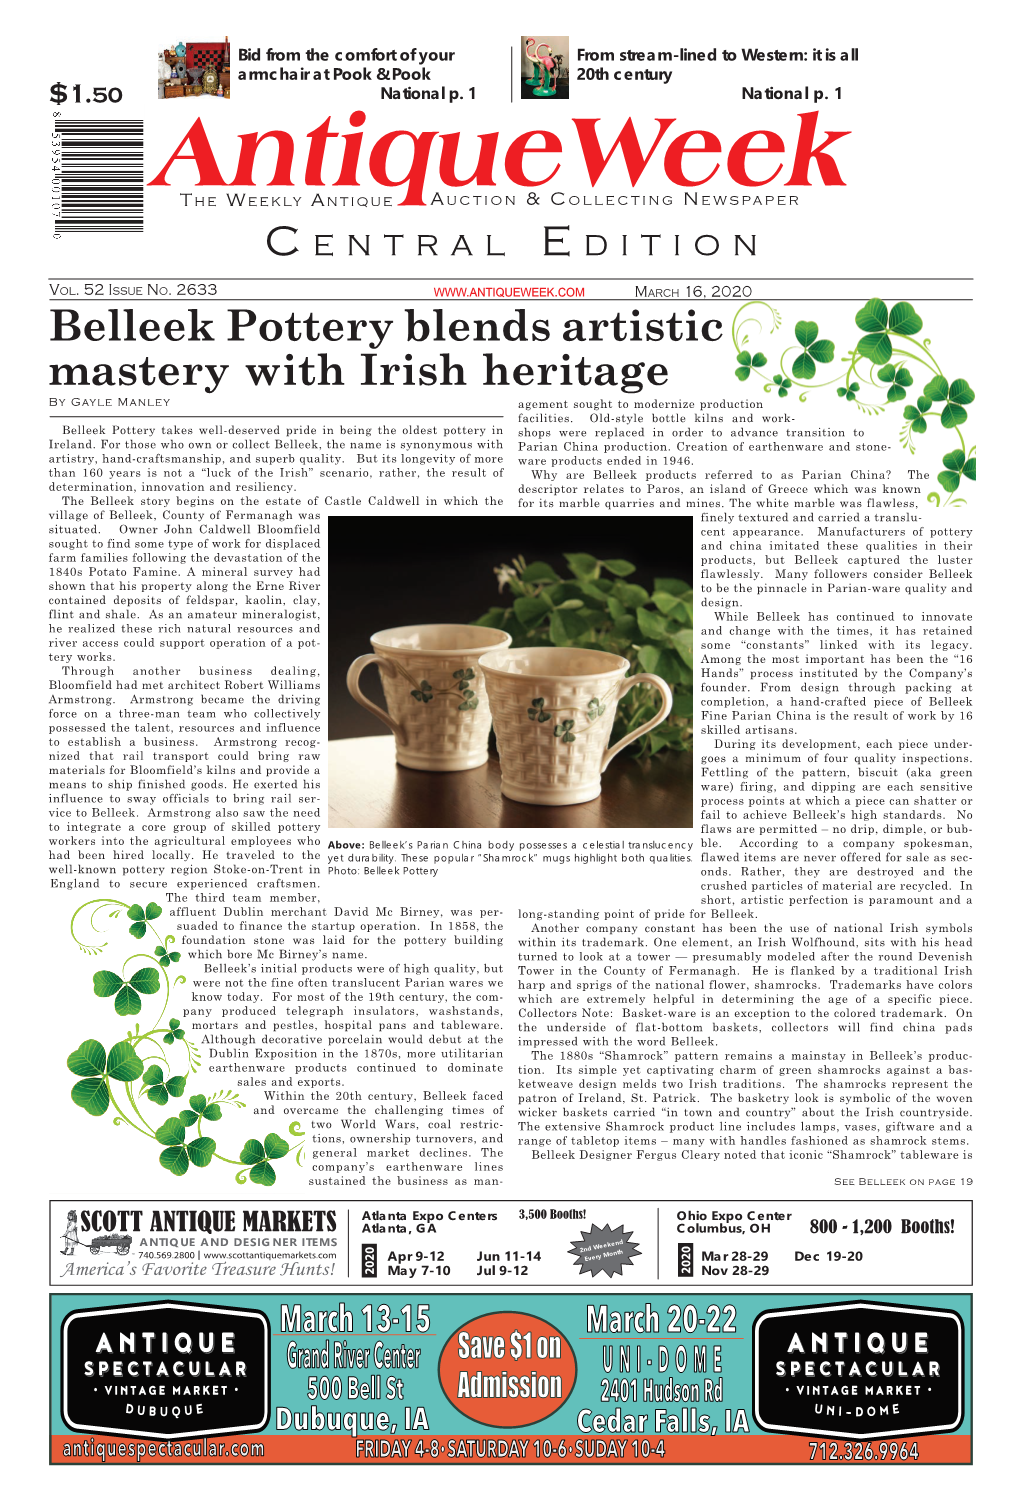 Belleek Pottery Blends Artistic Mastery with Irish Heritage by Gayle Manley Agement Sought to Modernize Production Facilities